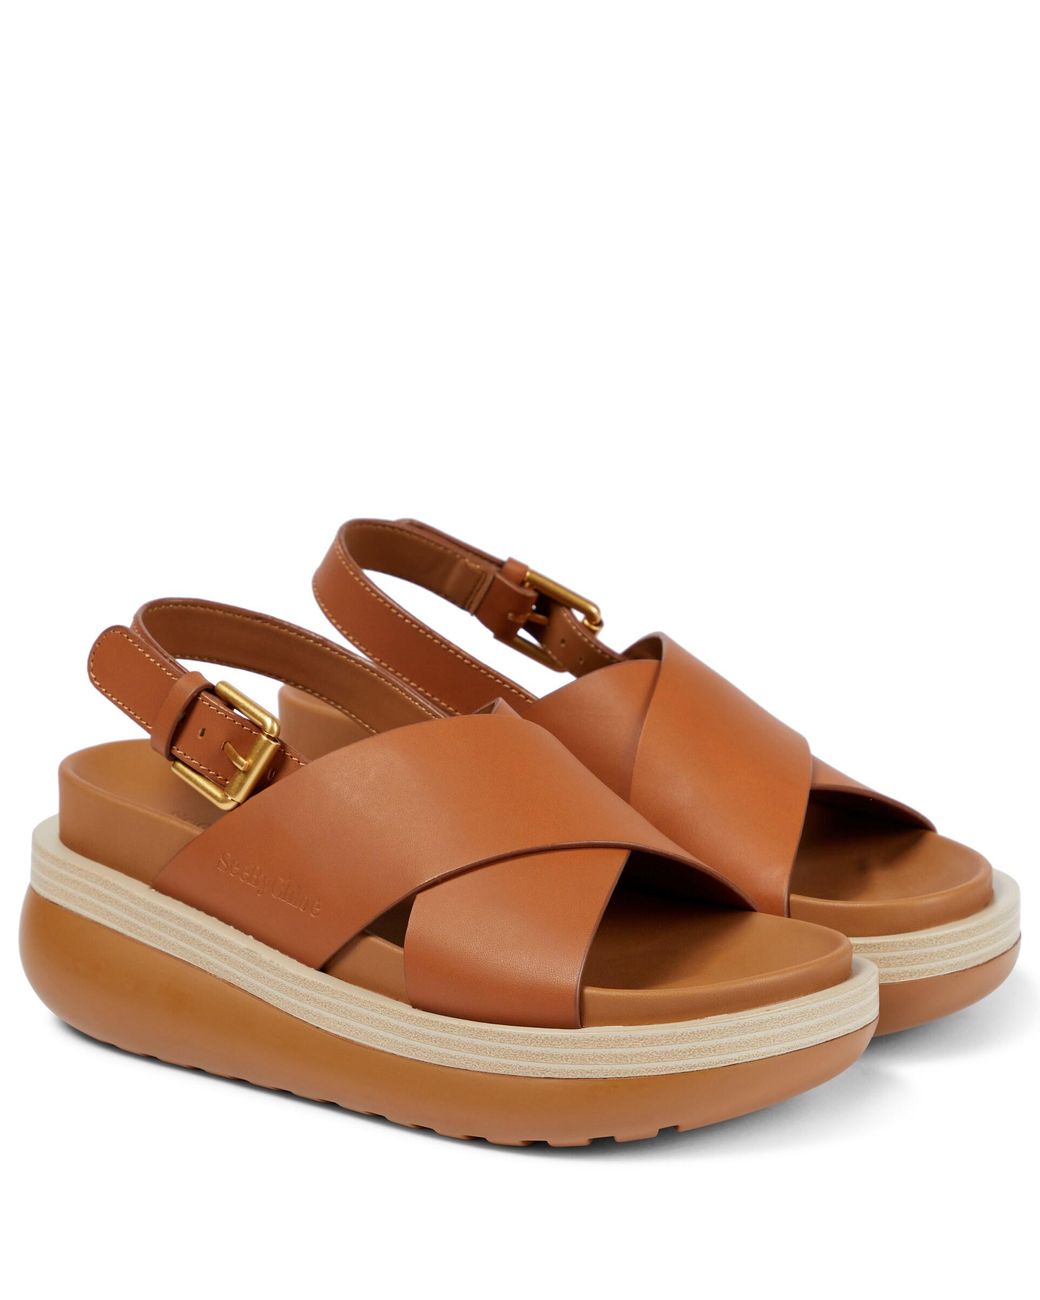 See By Chloé Cicily Leather Slingback Sandals in Brown | Lyst